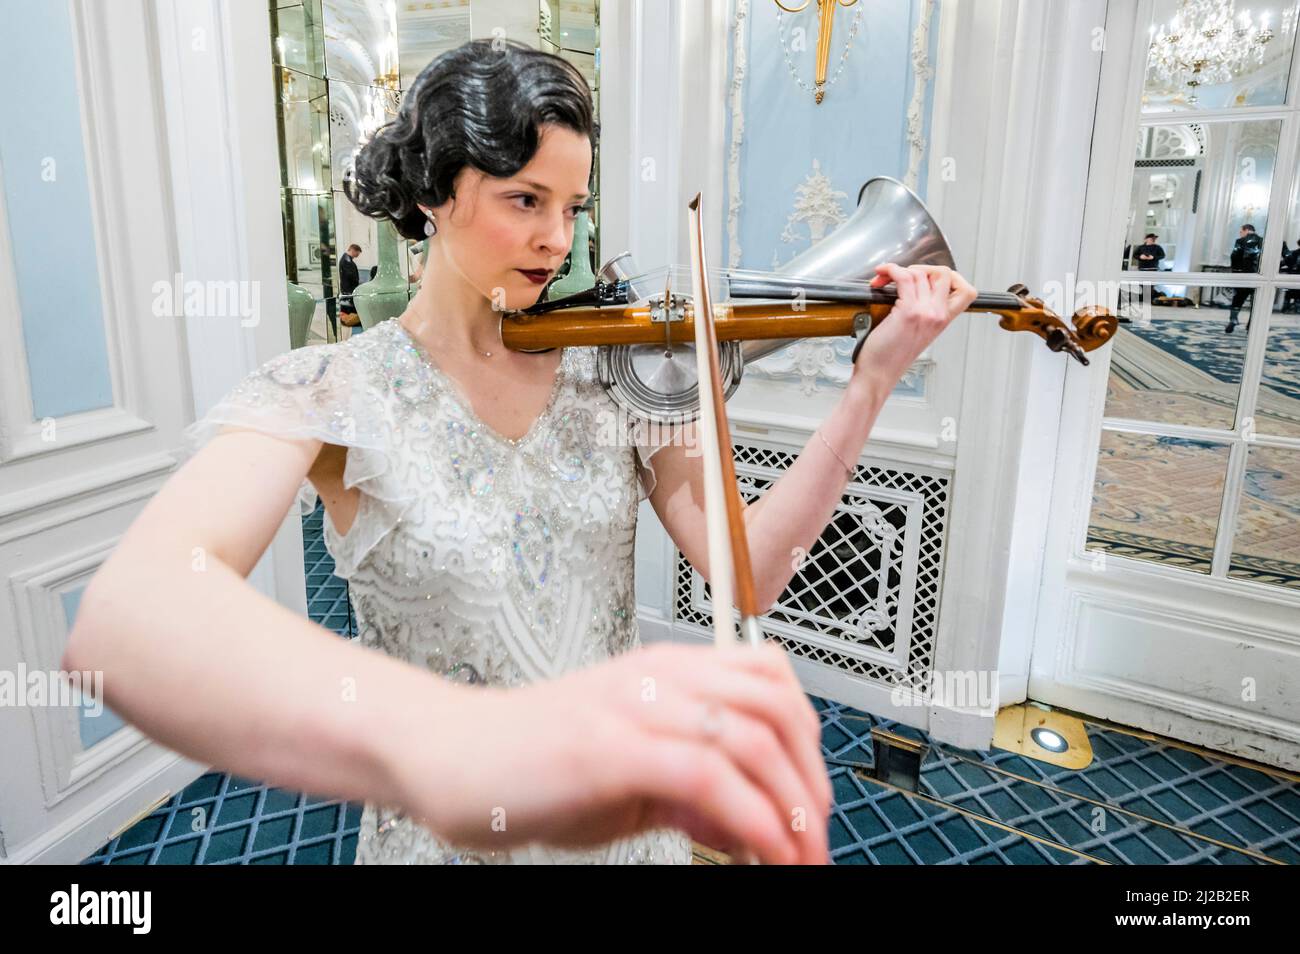 London, UK. 31 Mar 2022. Rebecca Smith plays the Stroh violin in a replica vintage dress - The Savoy combines forces with Alex Mendham and his orchestra to raise funds for Ukraine. In the 1920s and 1930s the Savoy Orpheans were a household name, and for this charitable collaboration, the orchestra will become ‘The New Savoy Orpheans', and create an exclusive recording in the hotel. They play in the hotel's Lancaster Ballroom, to record a medley of pieces that represent the finest melodies of the Jazz Age with the intention of raising valuable funds for the Disasters Emergency Committee. Cr Stock Photo